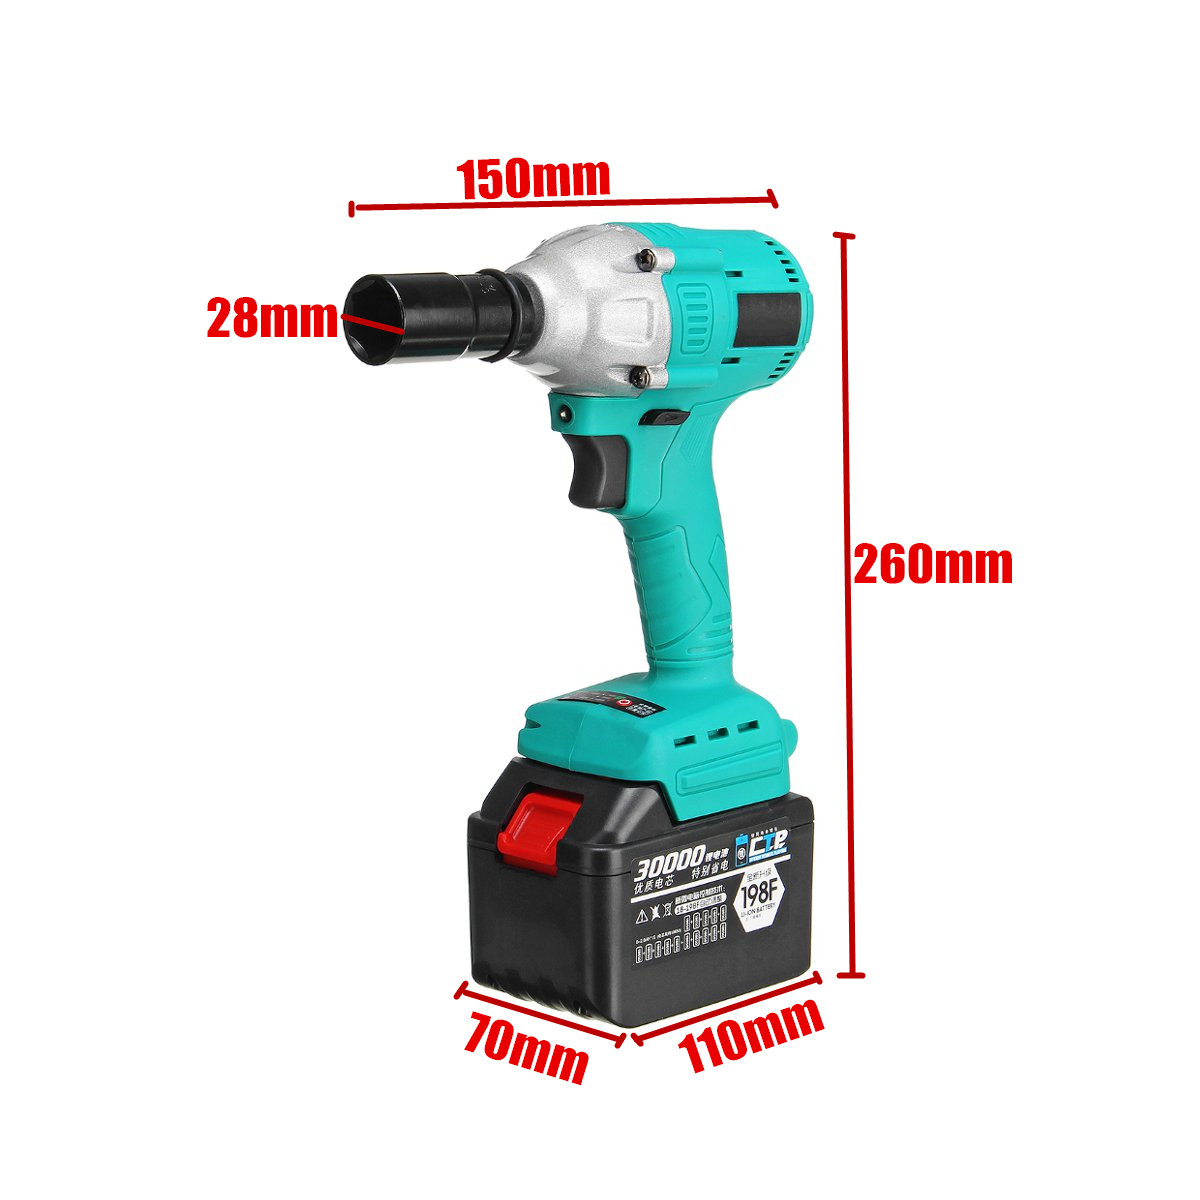 30000mAh Brushless Electric Wrench Li-ion Impact Wrench Wood Working Driver Wrench Tools